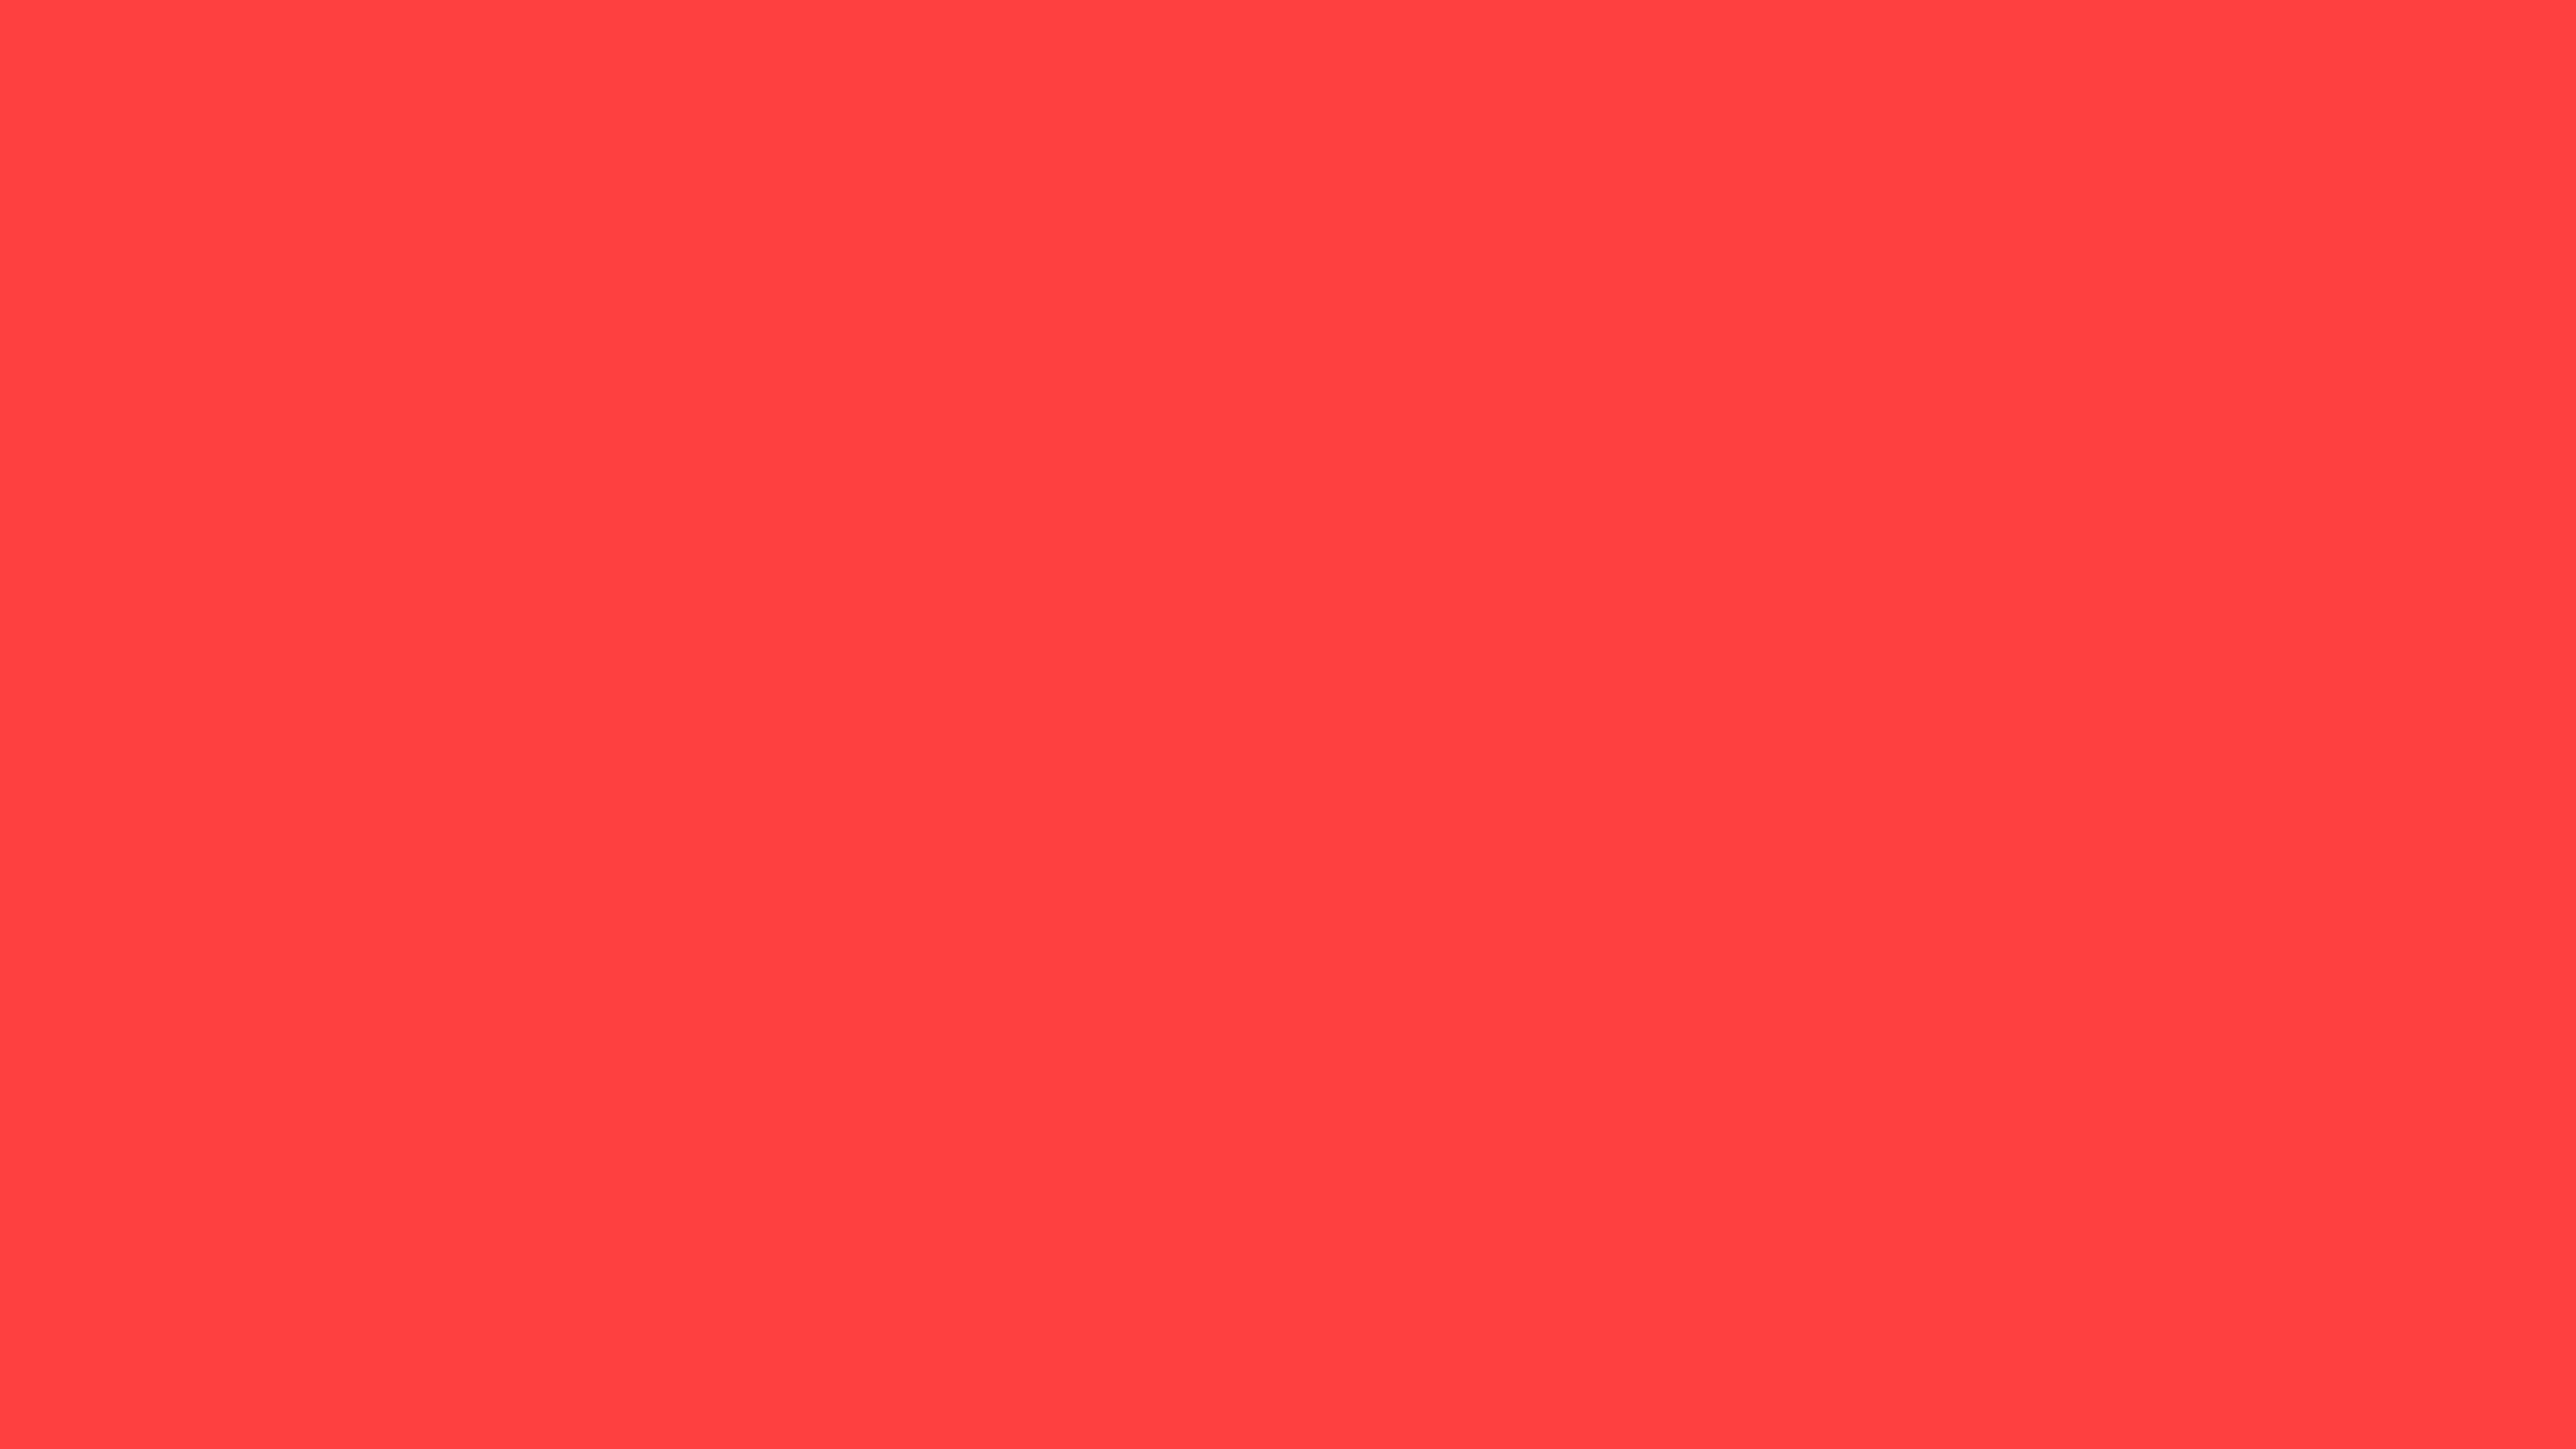 4096x2304 Coral Red Solid Color Background